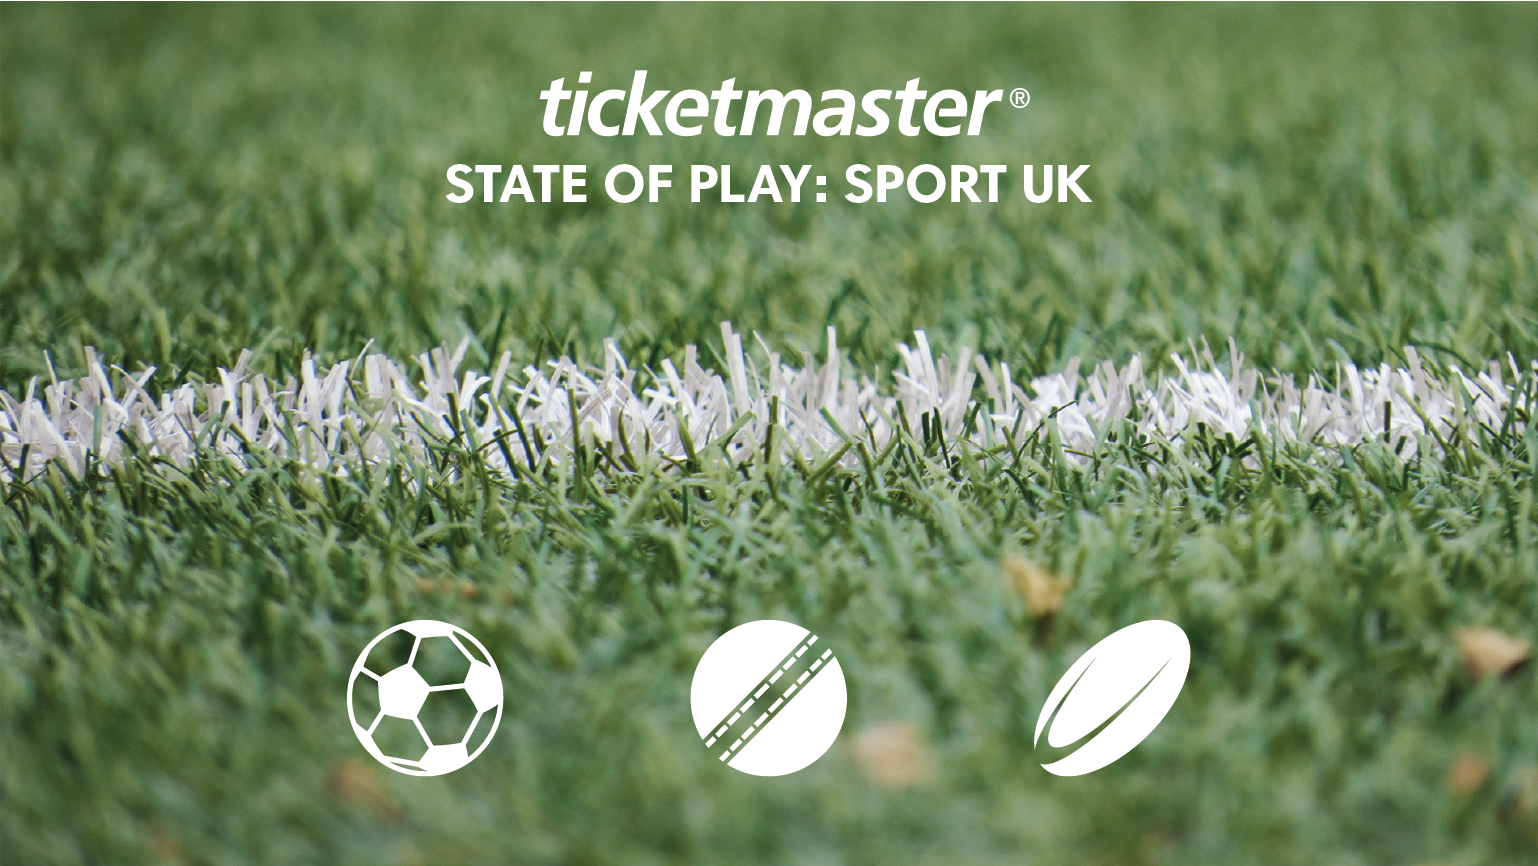 Ticketmaster State of Play: Sport UK